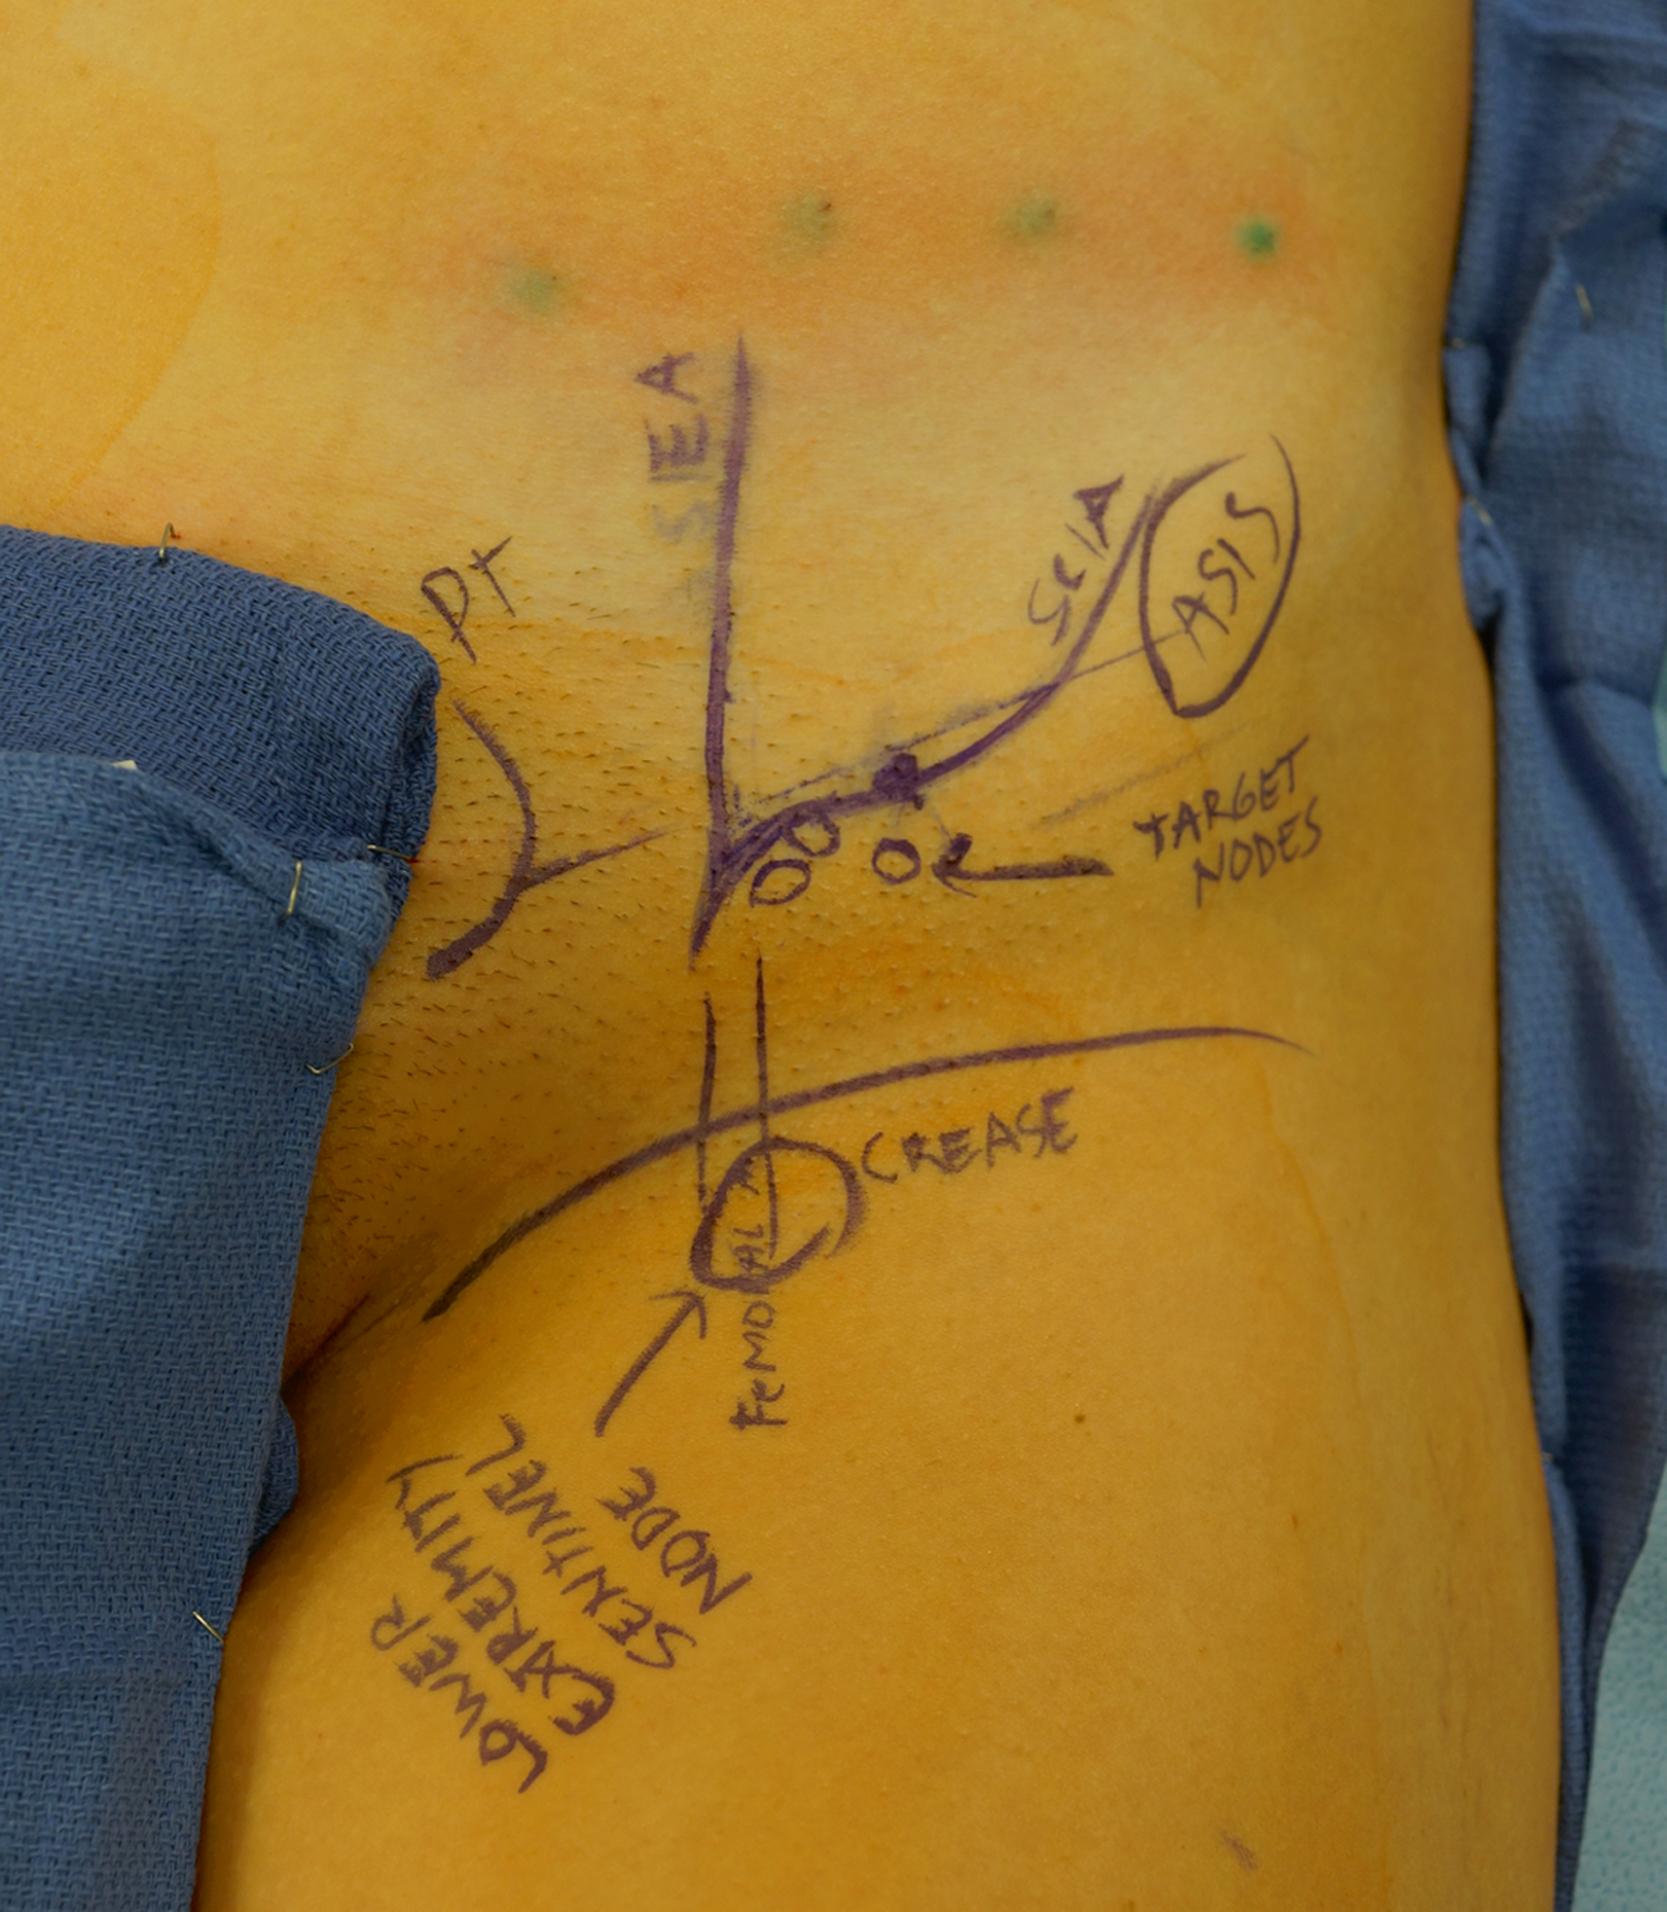 Fig. 19.1, Preoperative markings demonstrating the location of the superficial circumflex iliac artery–based inguinal nodes confirmed by indocyanine green lymphangiography. A gamma probe localized the lower limb sentinel node below the groin crease as a marker.